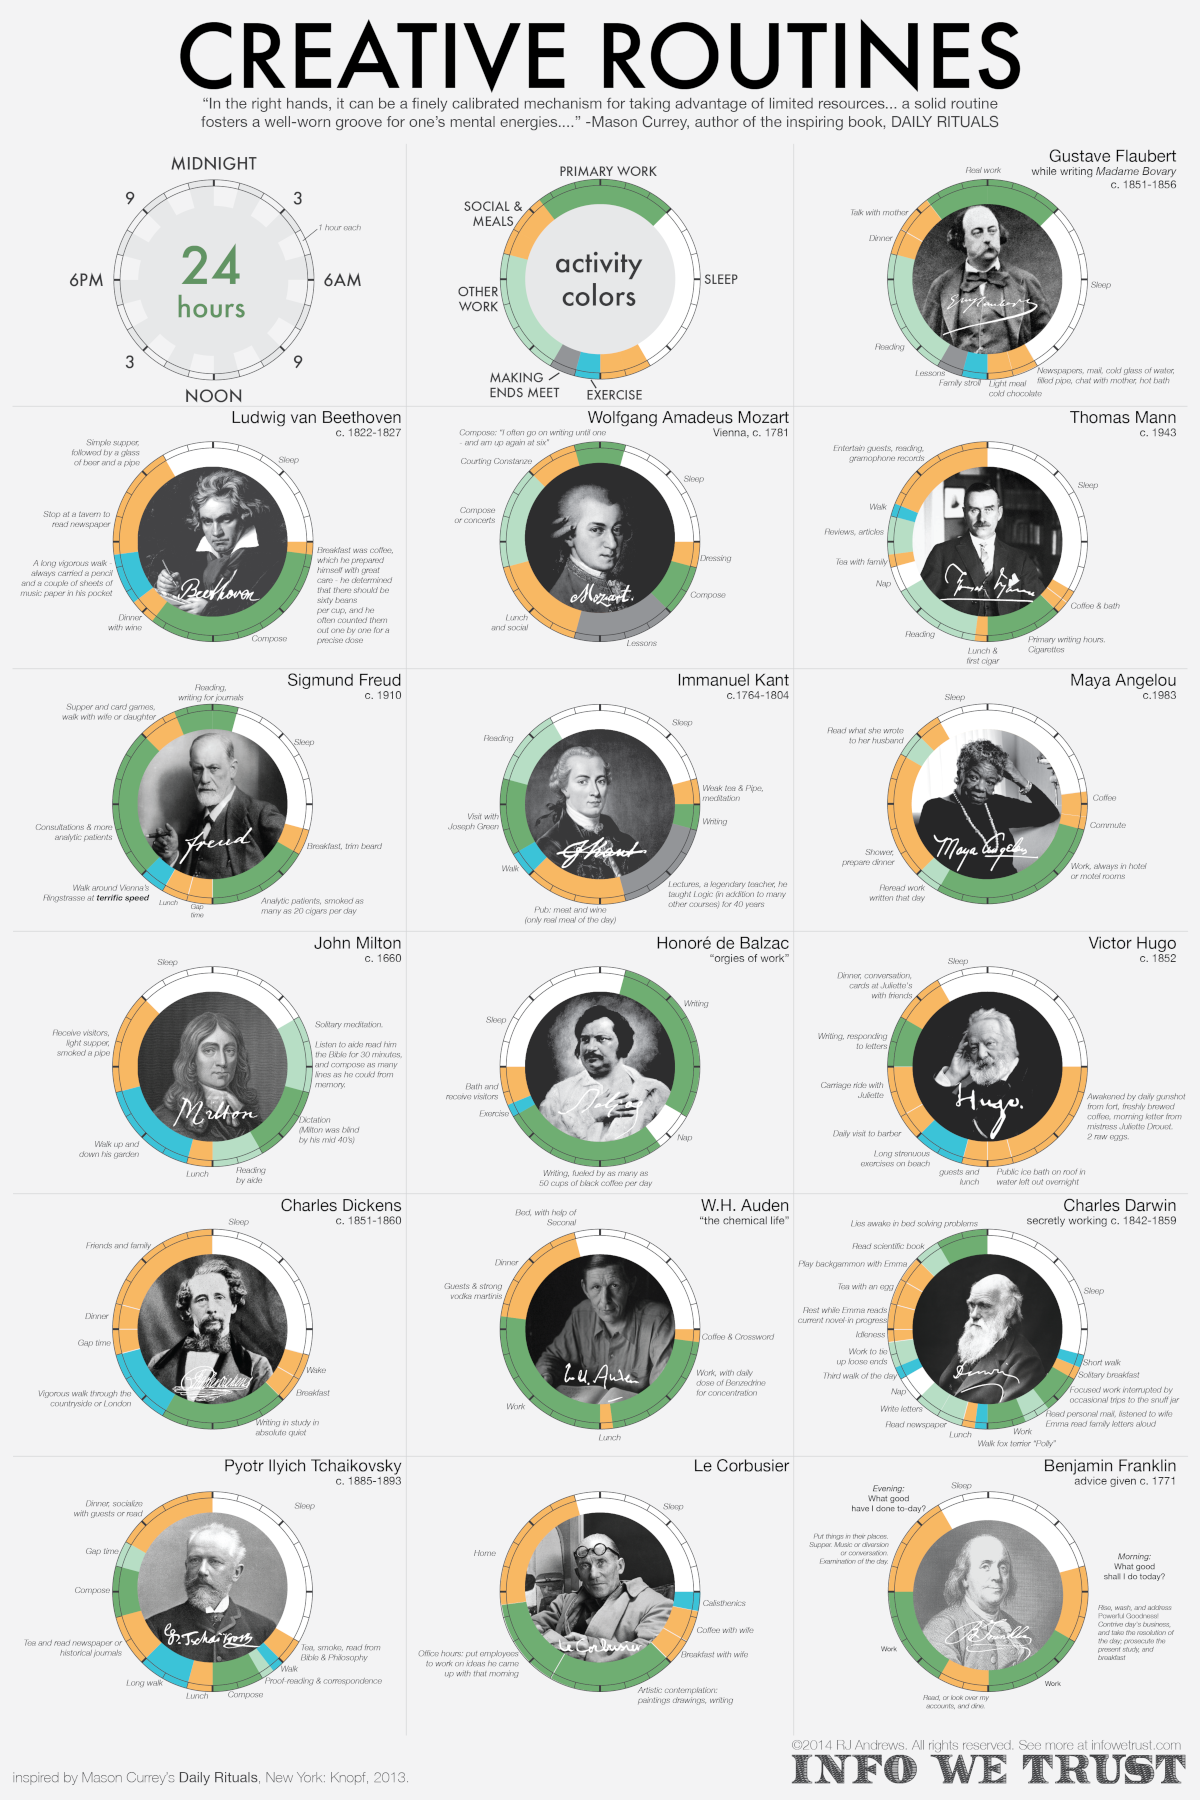 A grid of donut charts showing the daily routines of 16 great artists, writers, and thinkers.